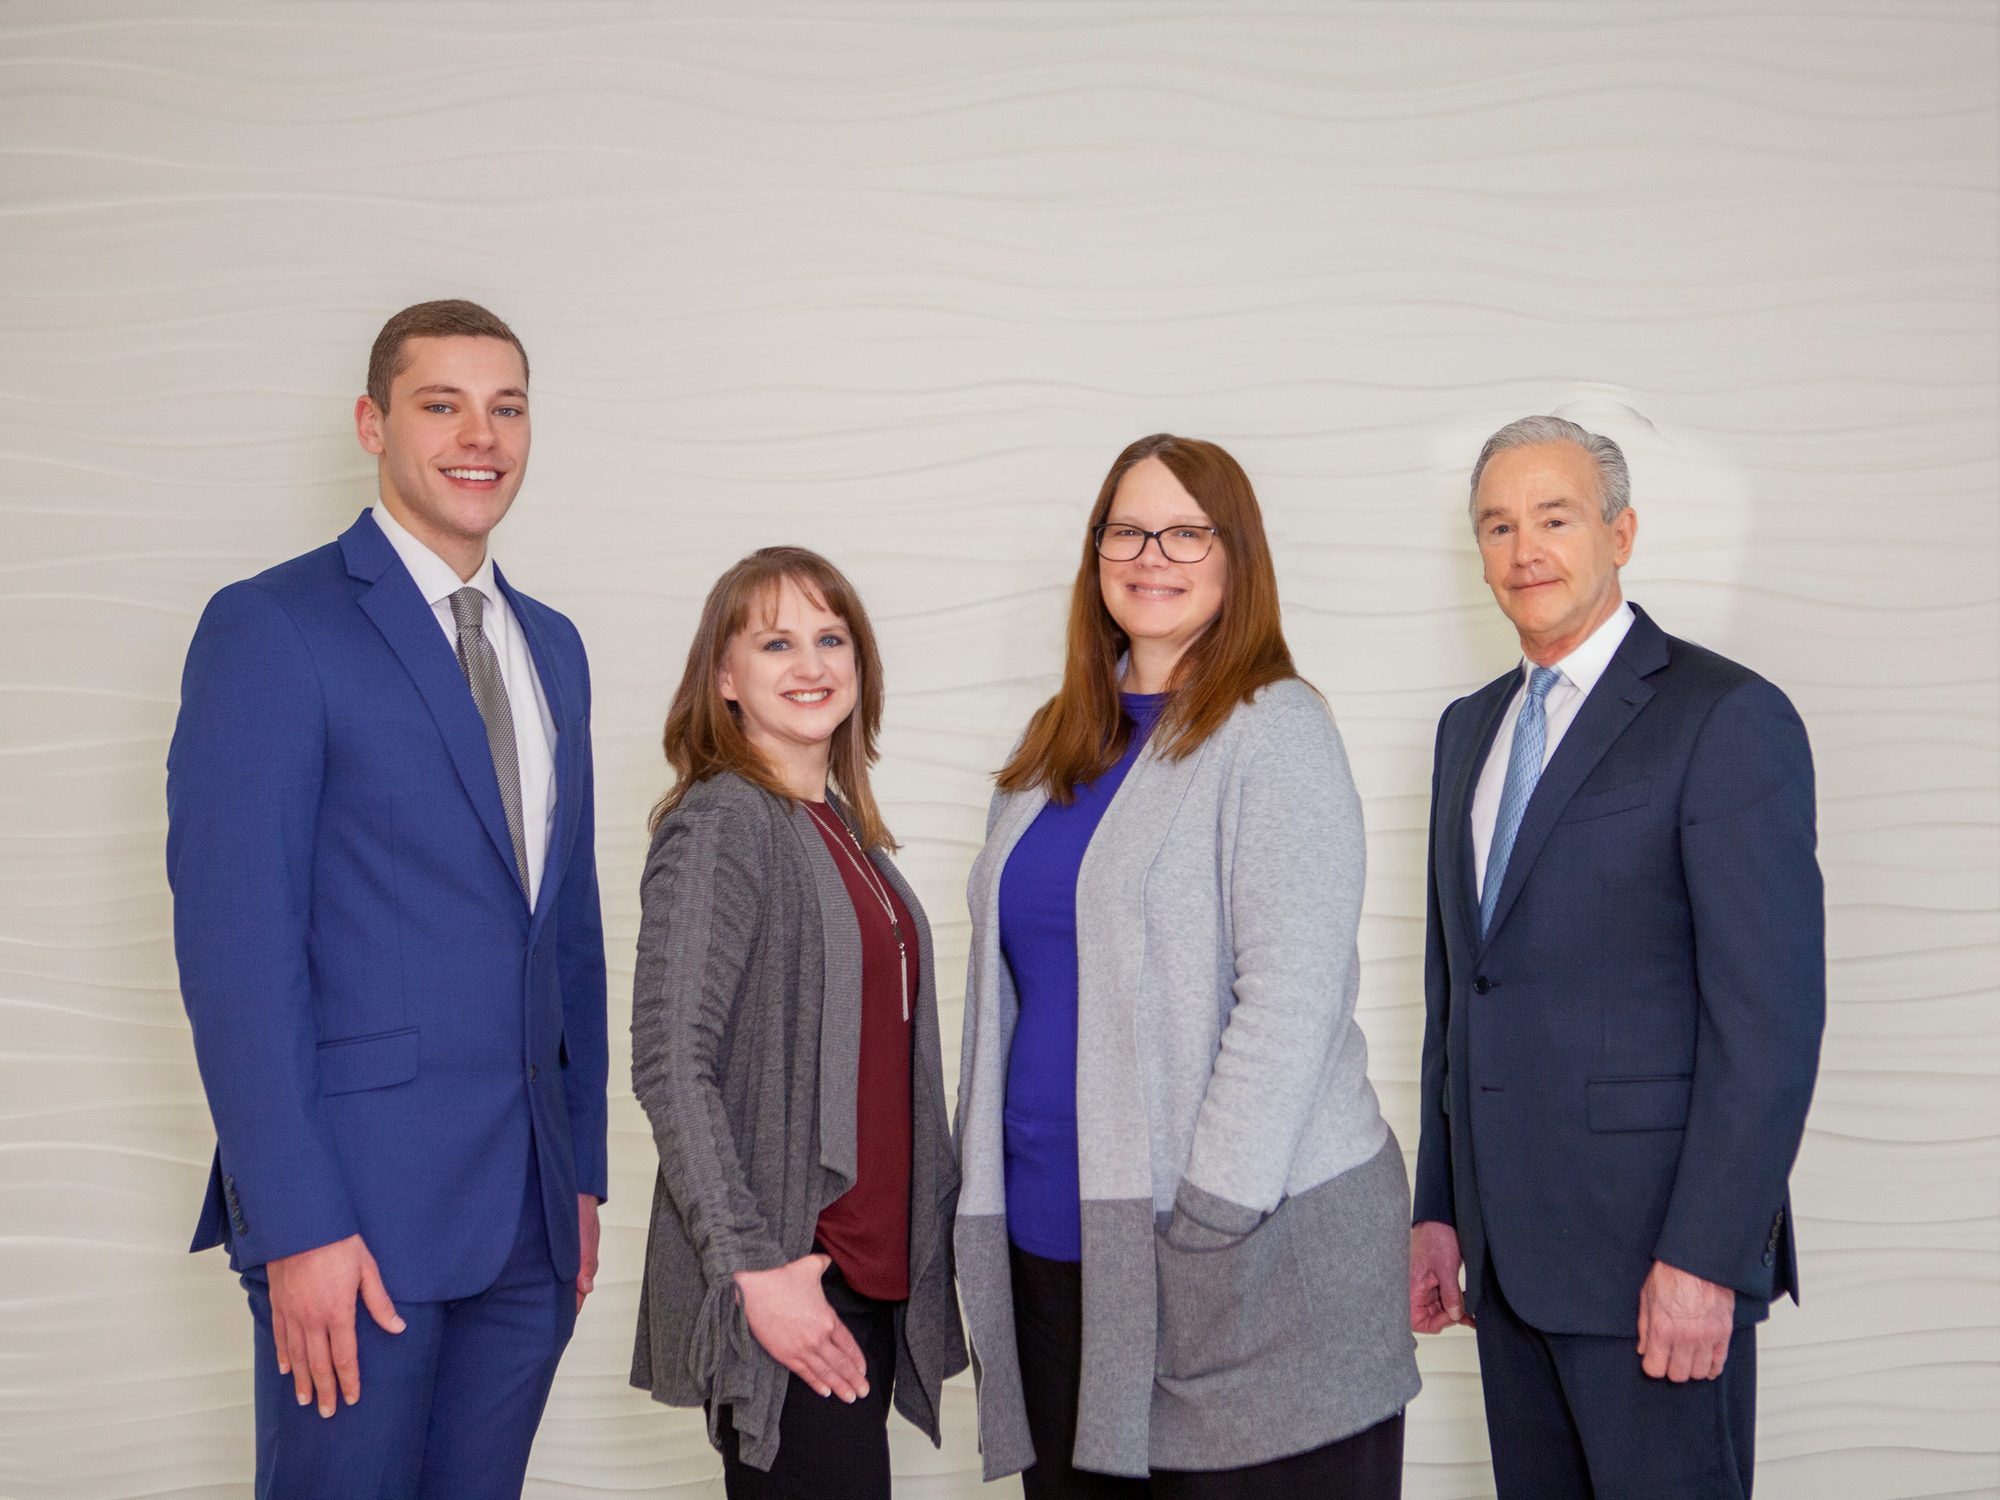 The Cunningham Financial Group